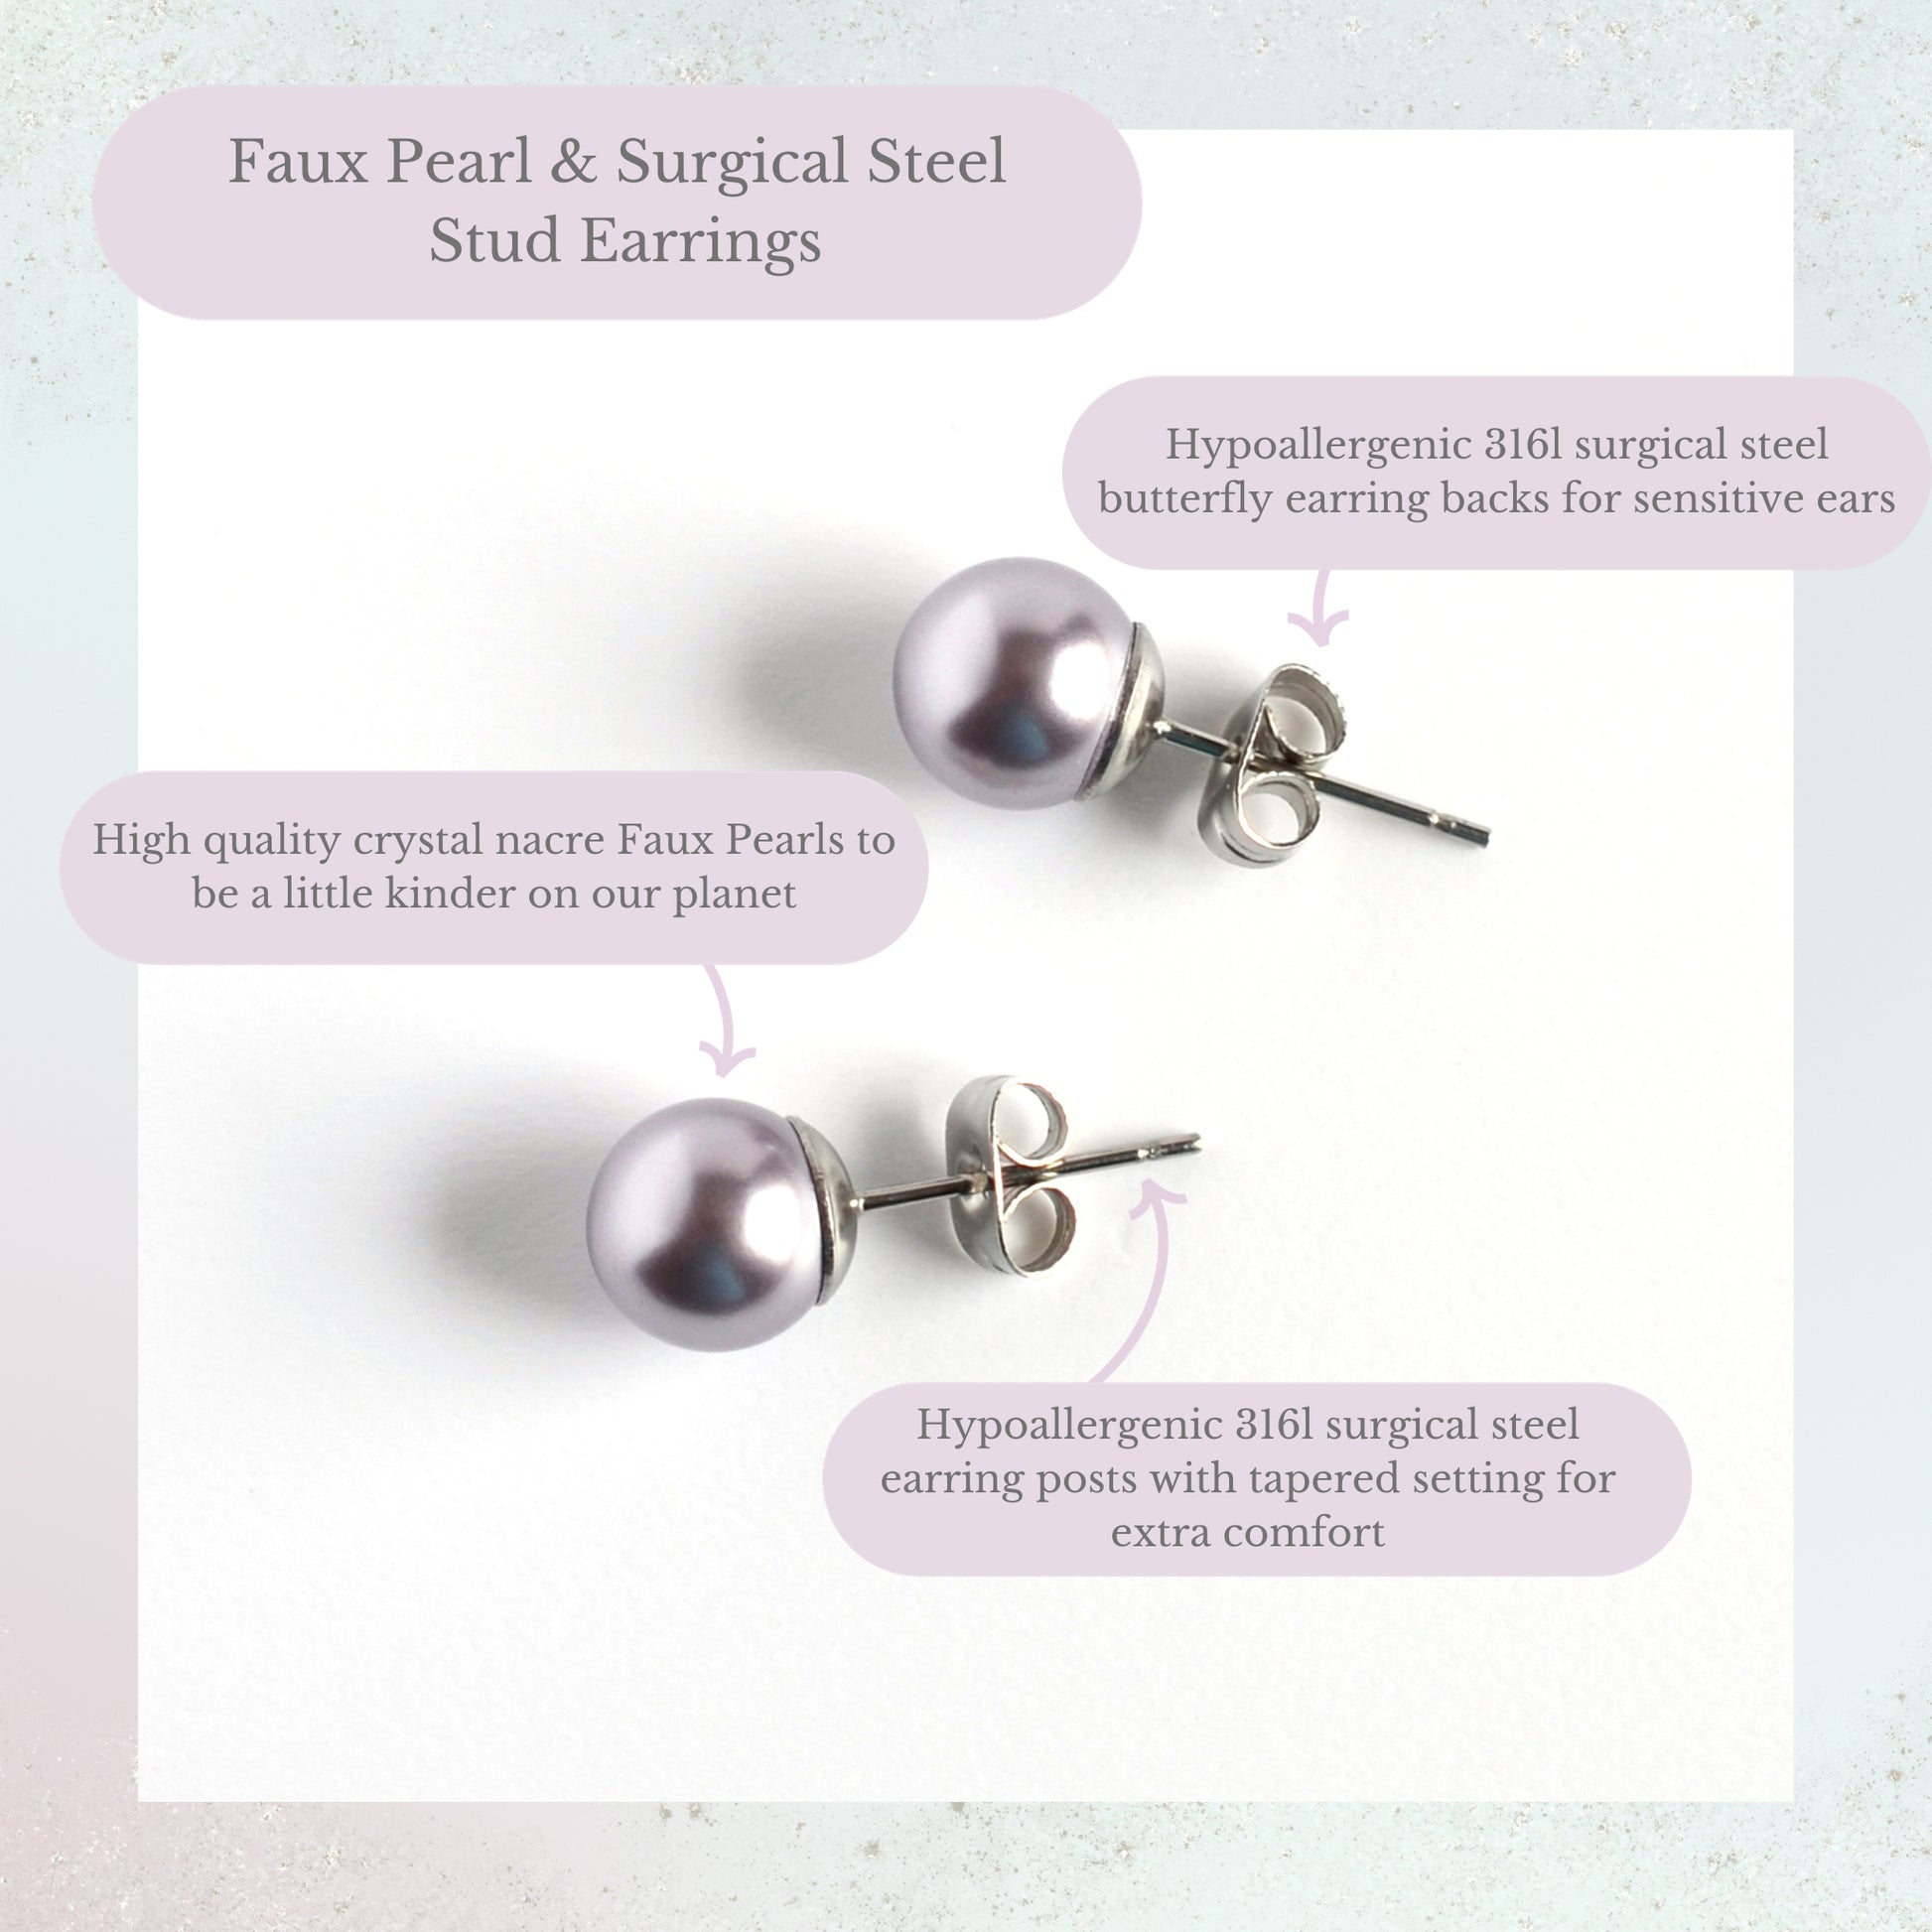 Faux pearl & surgical steel stud earrings product information graphic